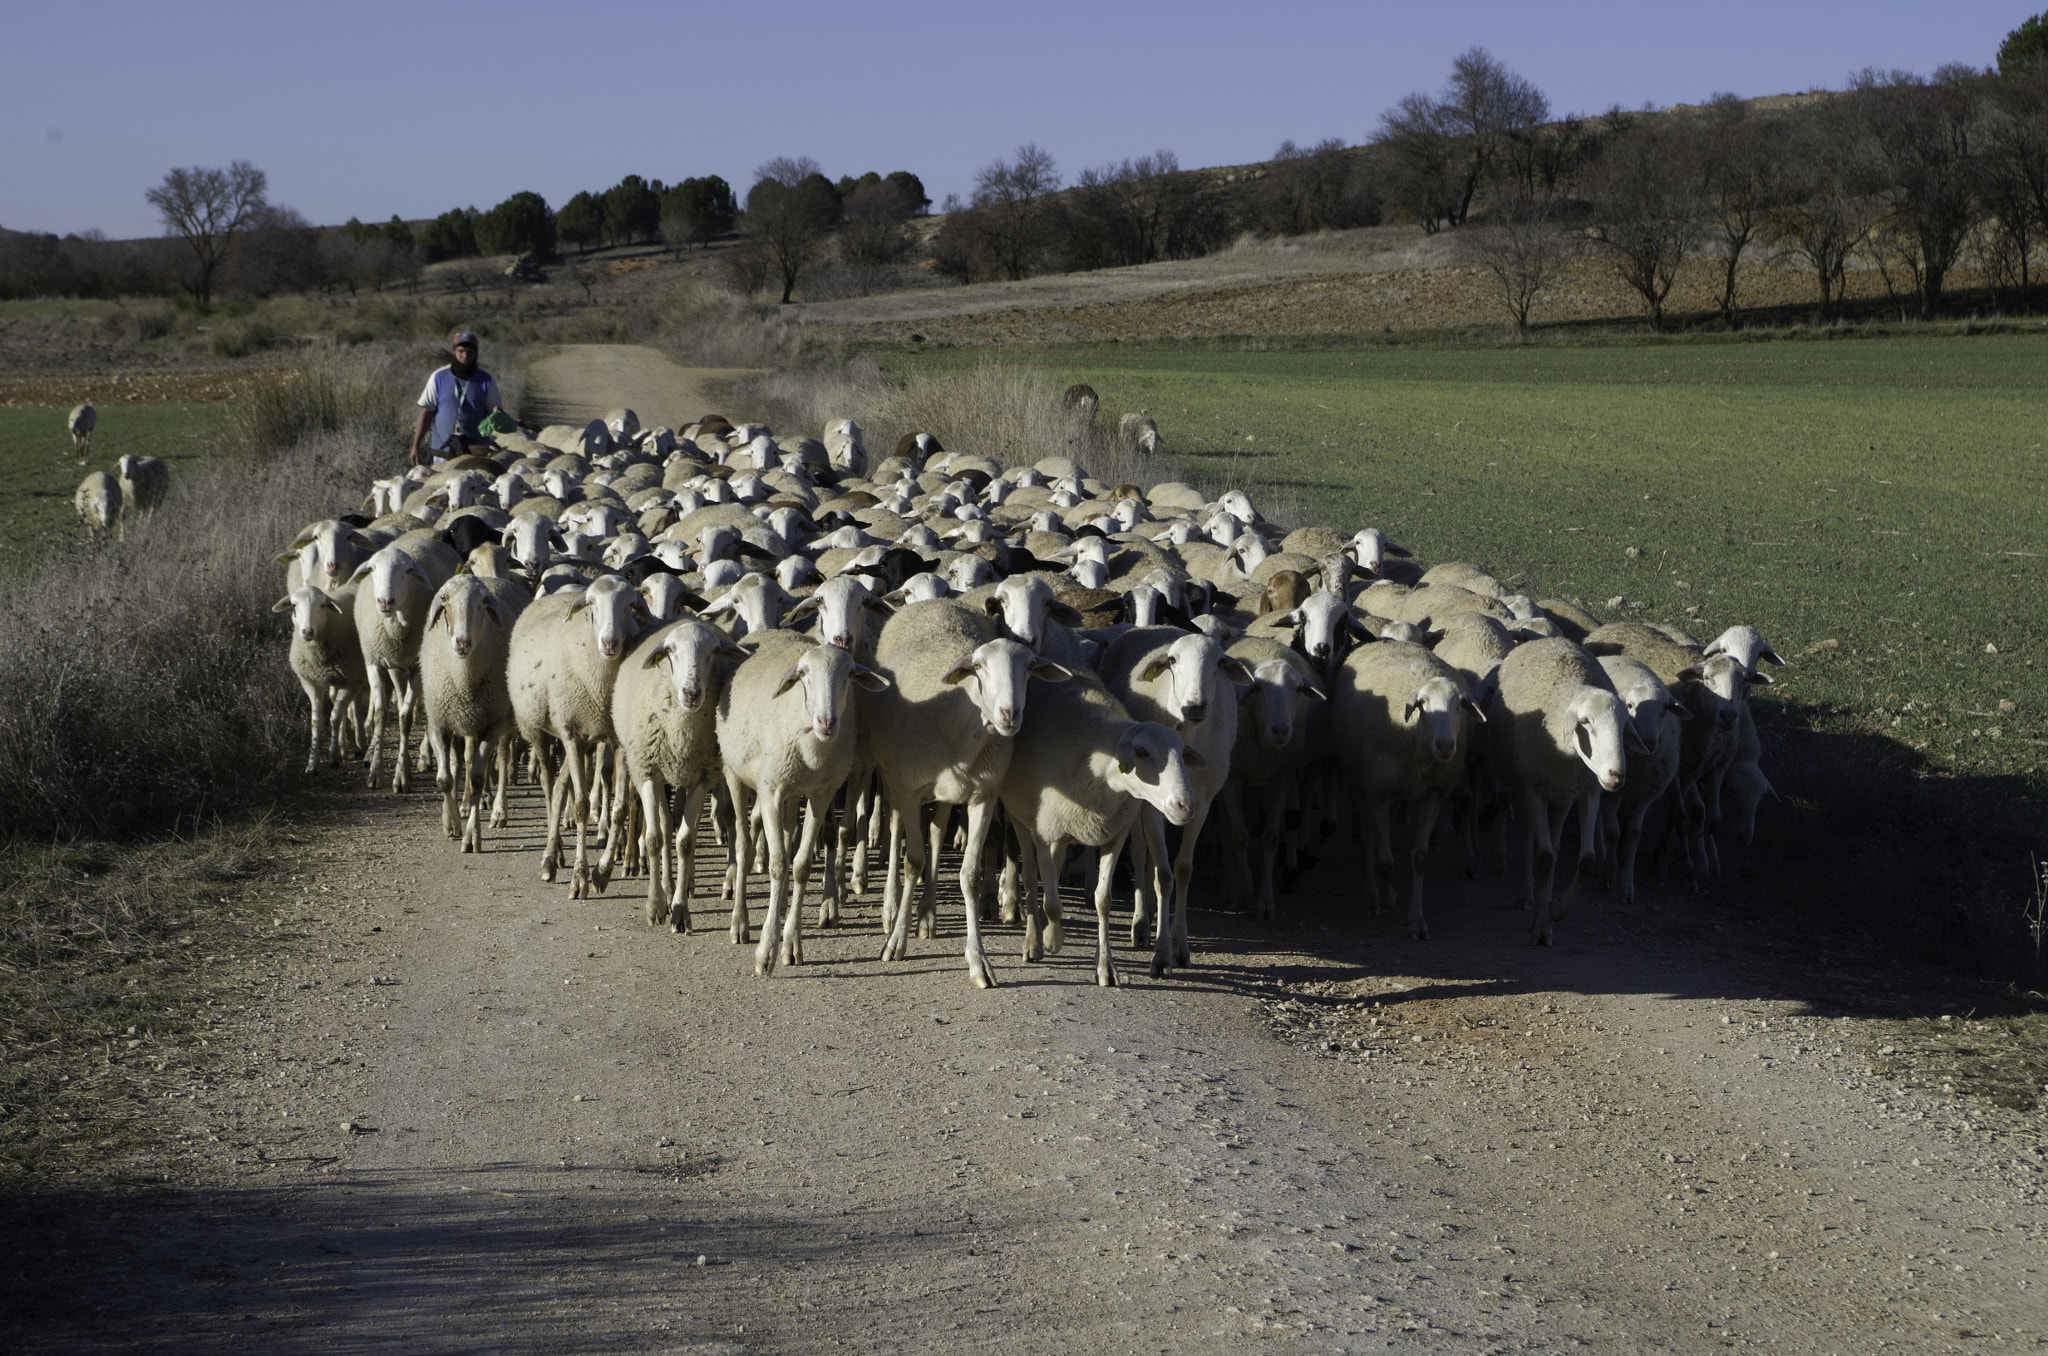 Pentax K-500 sample photo. Excellent flock of sheep photography